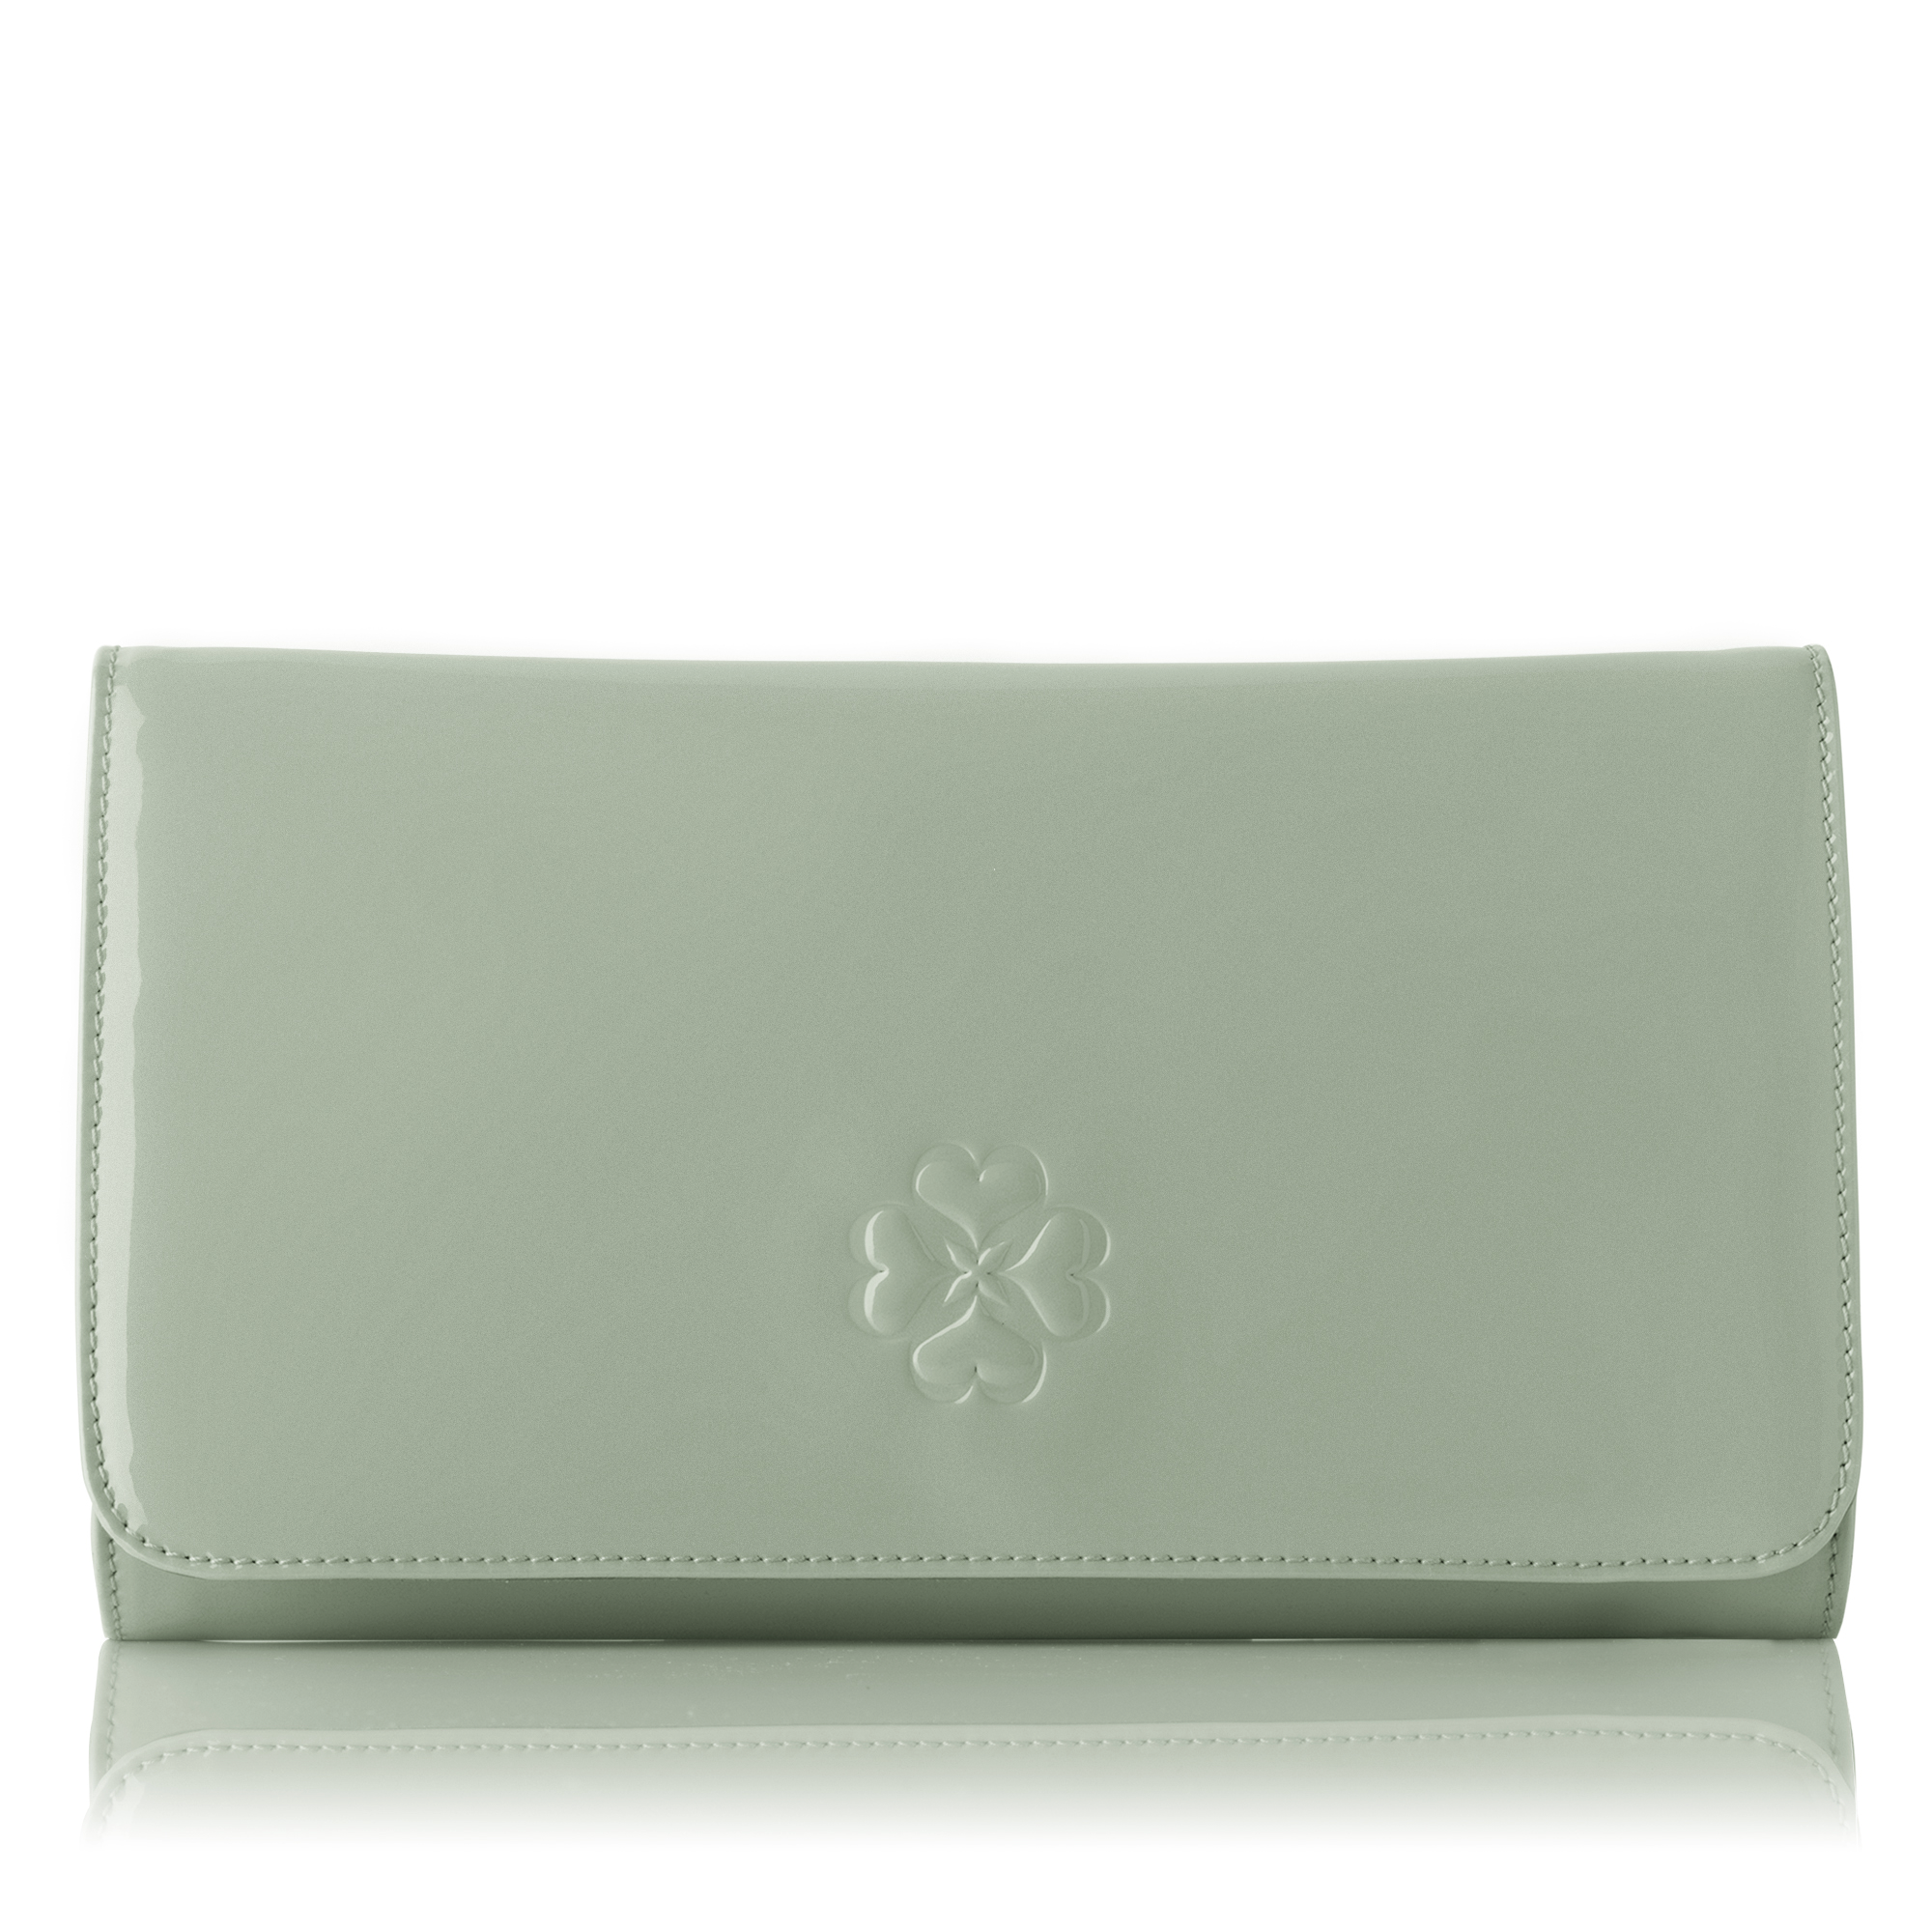 Frome Patent Clutch in 'Clay'